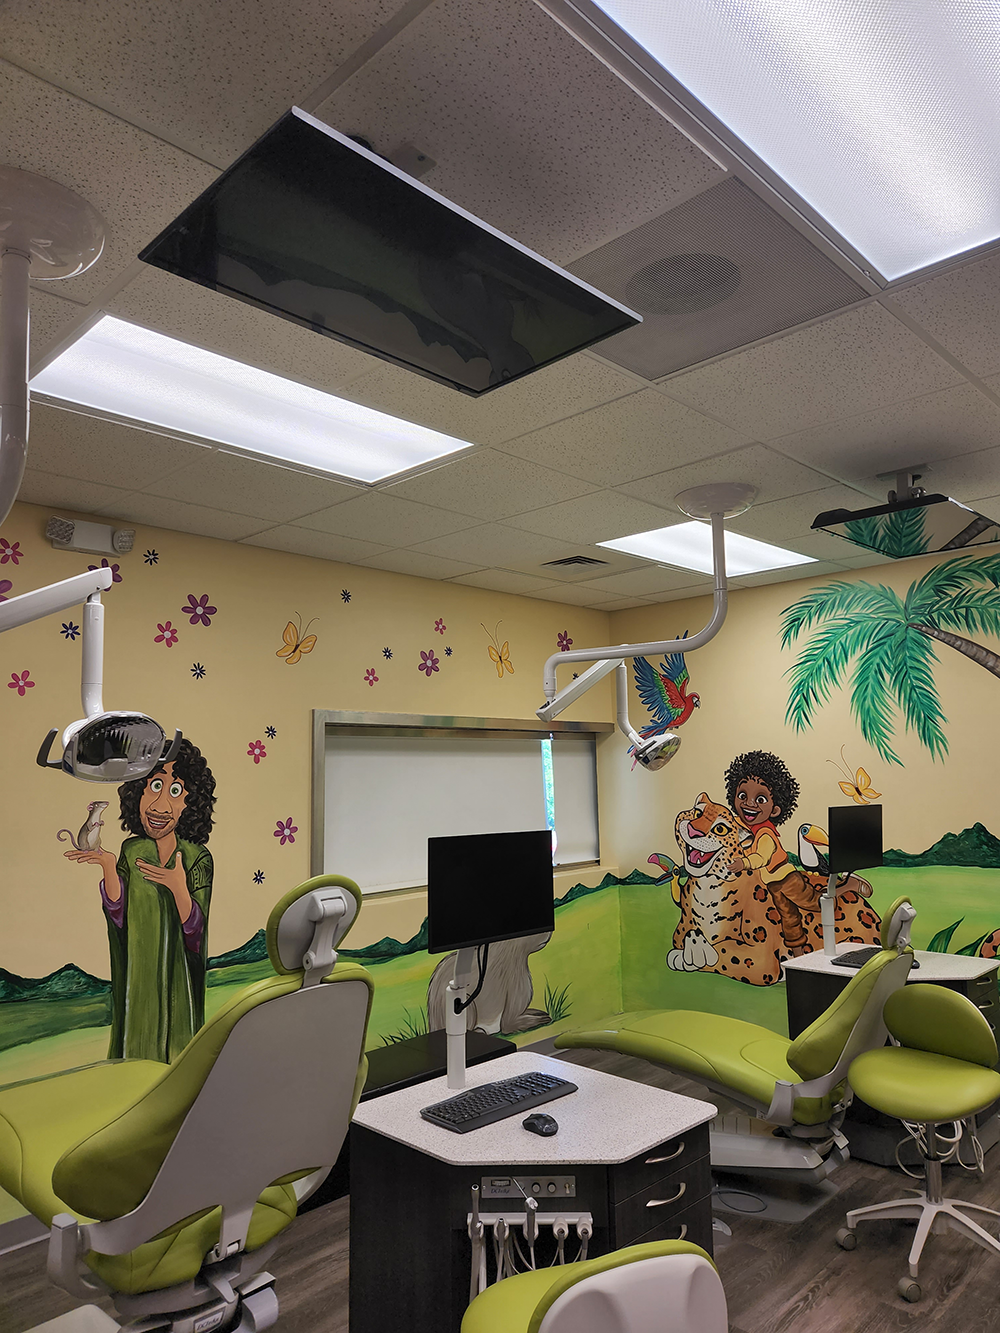 Hillside Family Dentistry patient chairs with colorful collage all over the walls with tv screens on the ceiling